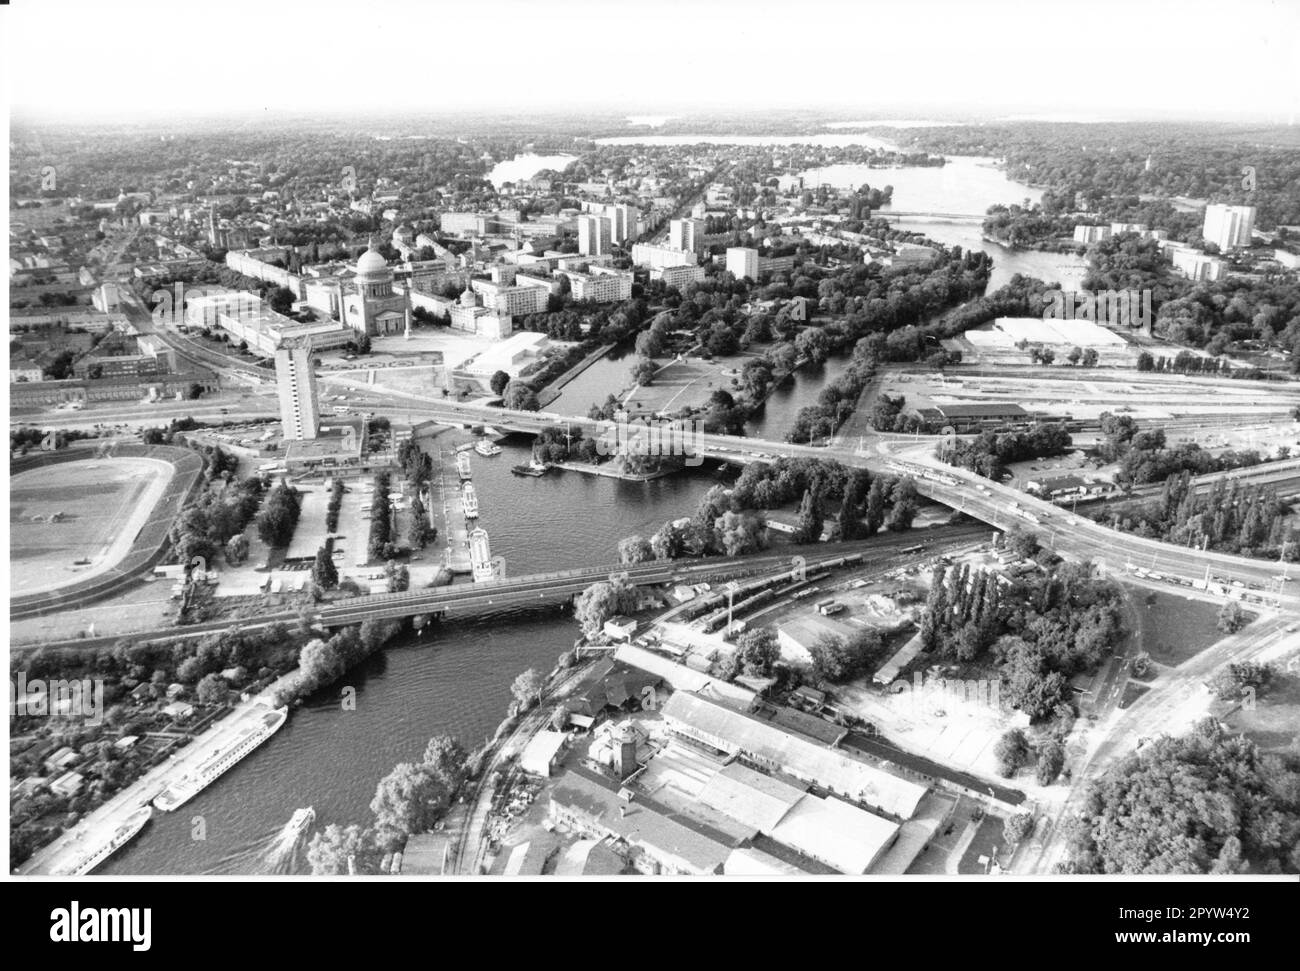 View of Potsdam from above, with harbor basin, Old Market and Friendship Island. Bridge. Havel river. City view. Aerial view. Photo:MAZ/Christel Köster, June 1993 [automated translation] Stock Photo